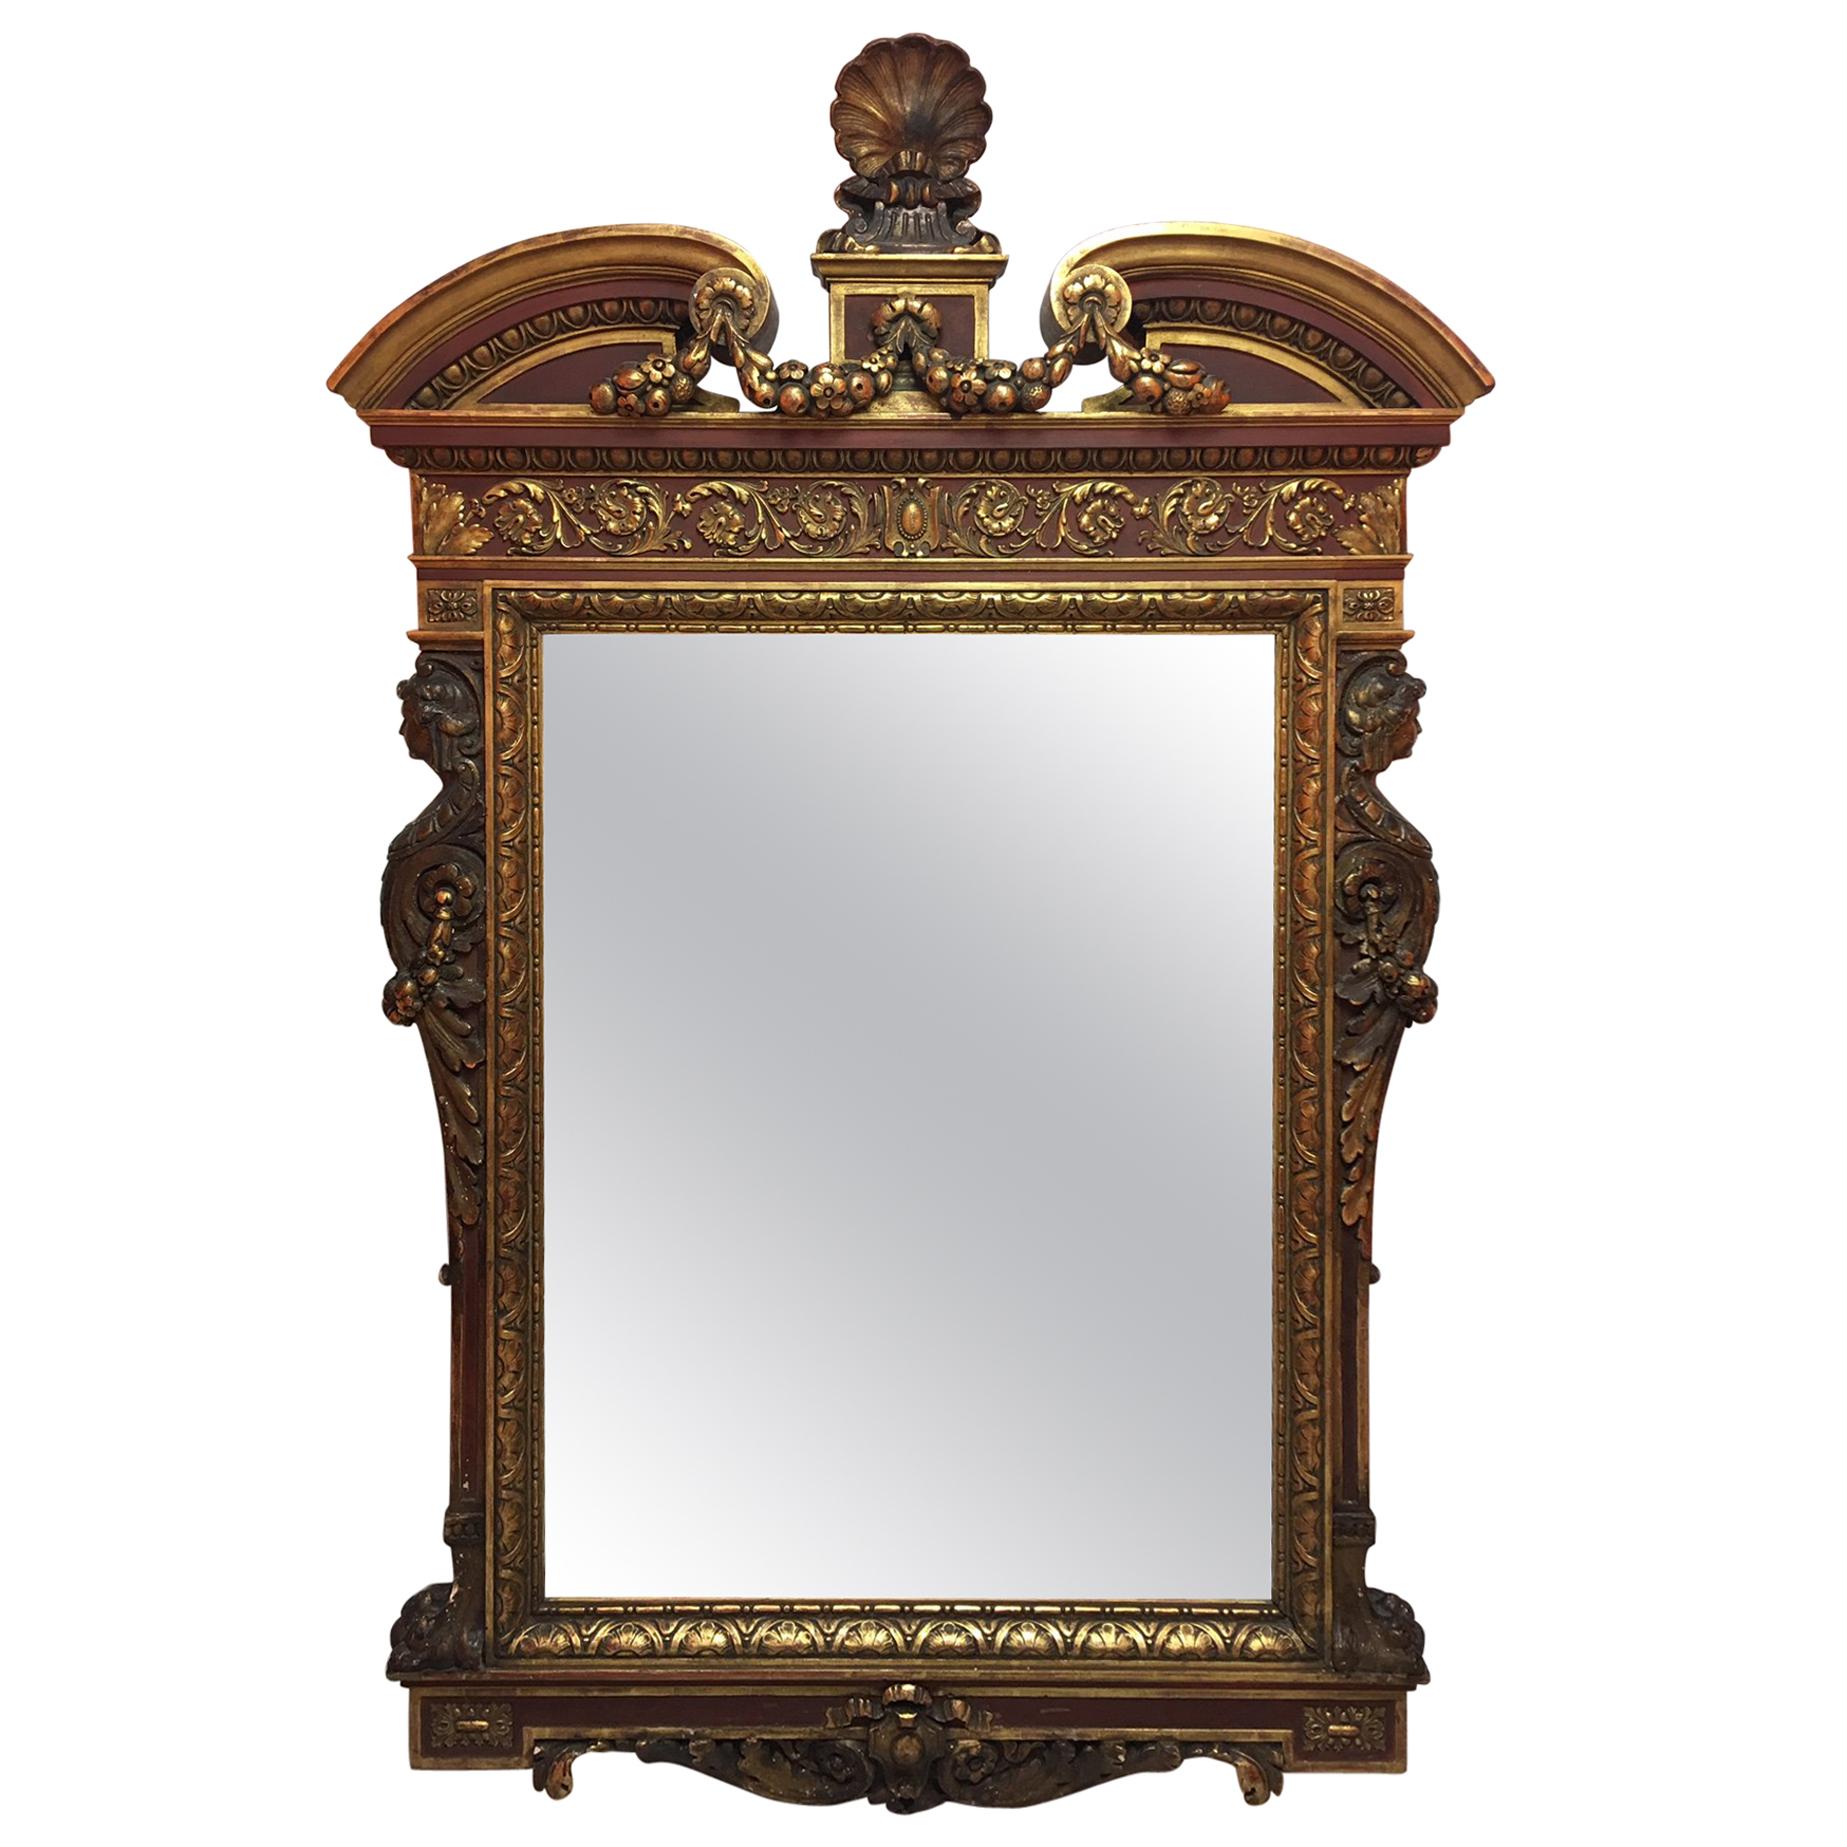 Gold Leaf Wood Carved Mirror with Figures on Each Side and Top Shell, circa 1890